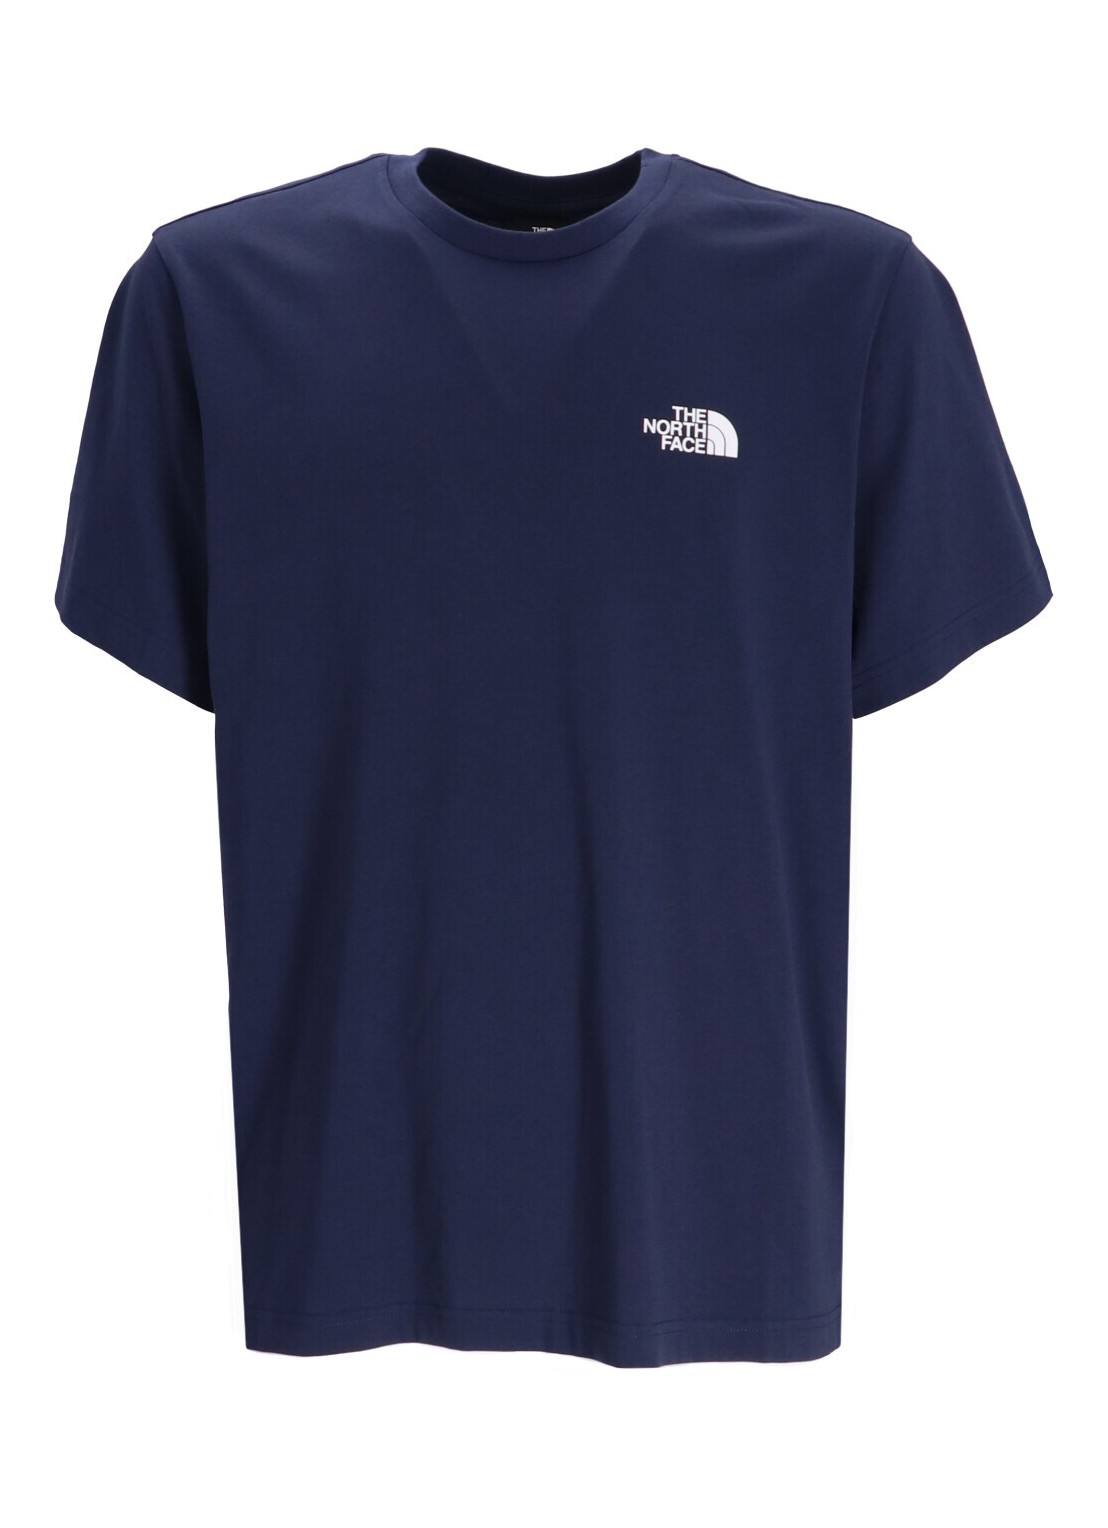 Camiseta the north face t-shirt man m s/s simple dome tee nf0a87ng8k21 8k21 talla XXL
 